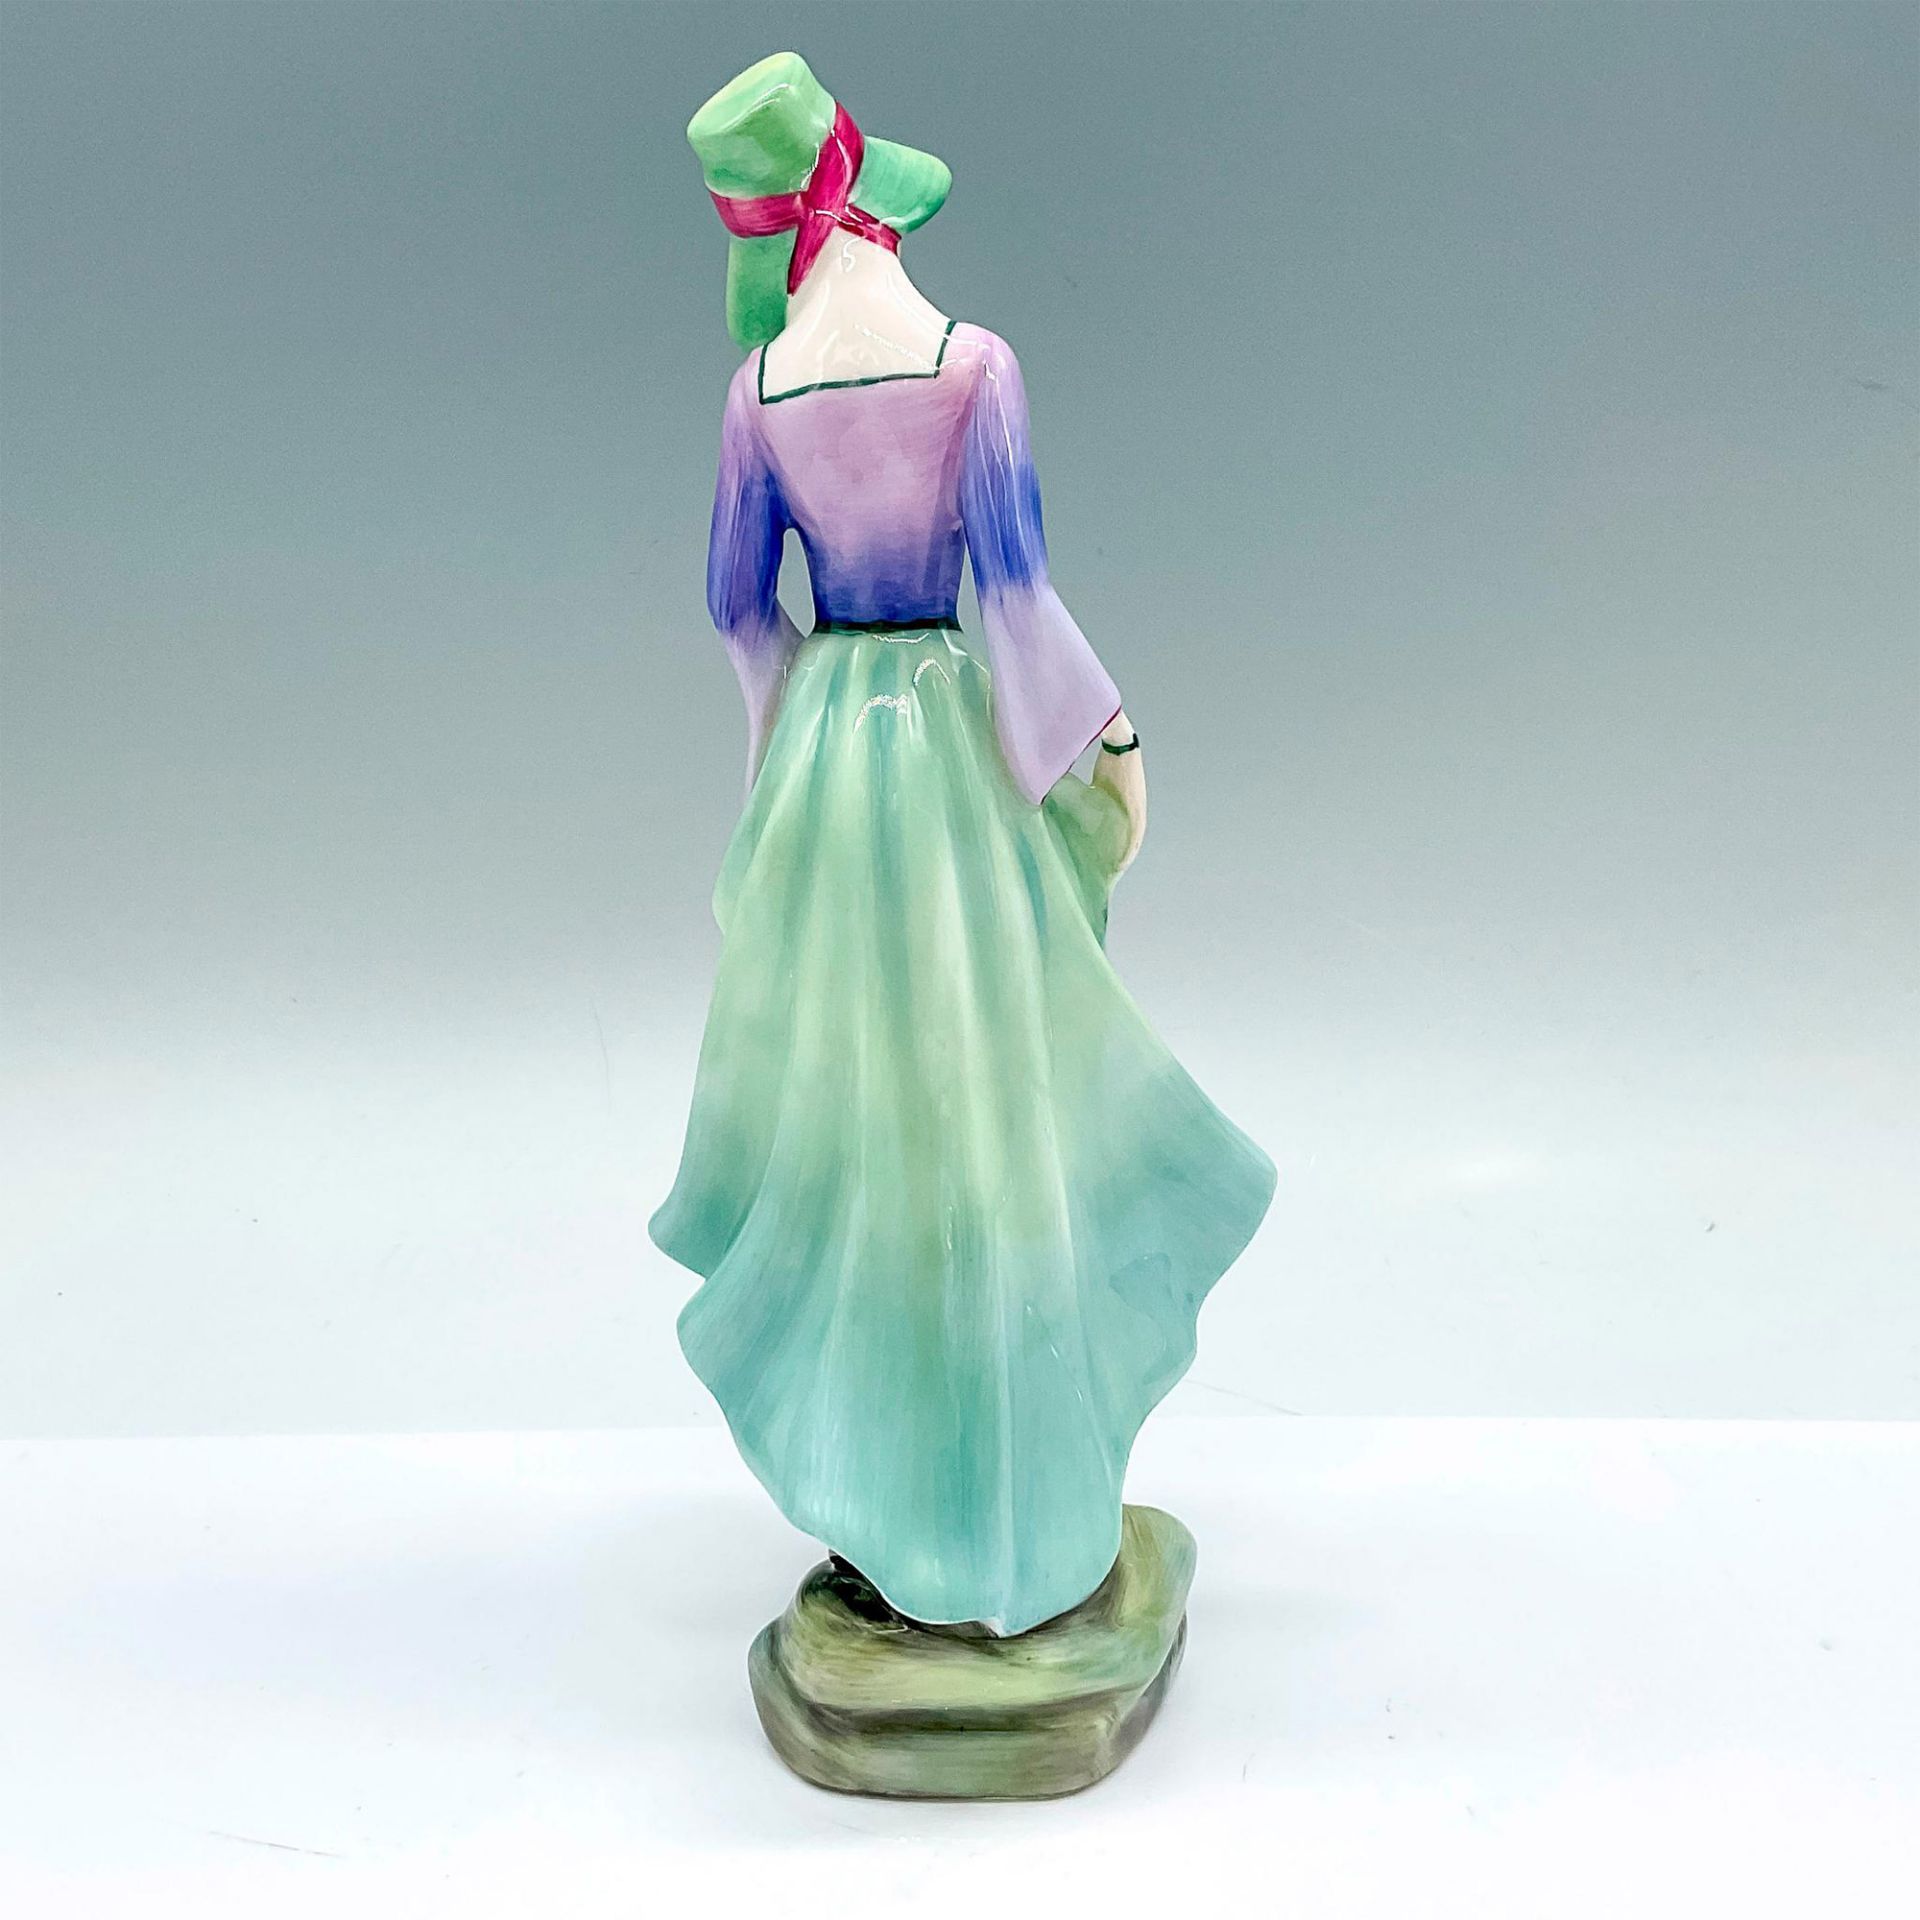 Polly - HN3178 - Royal Doulton Figurine - Image 2 of 3